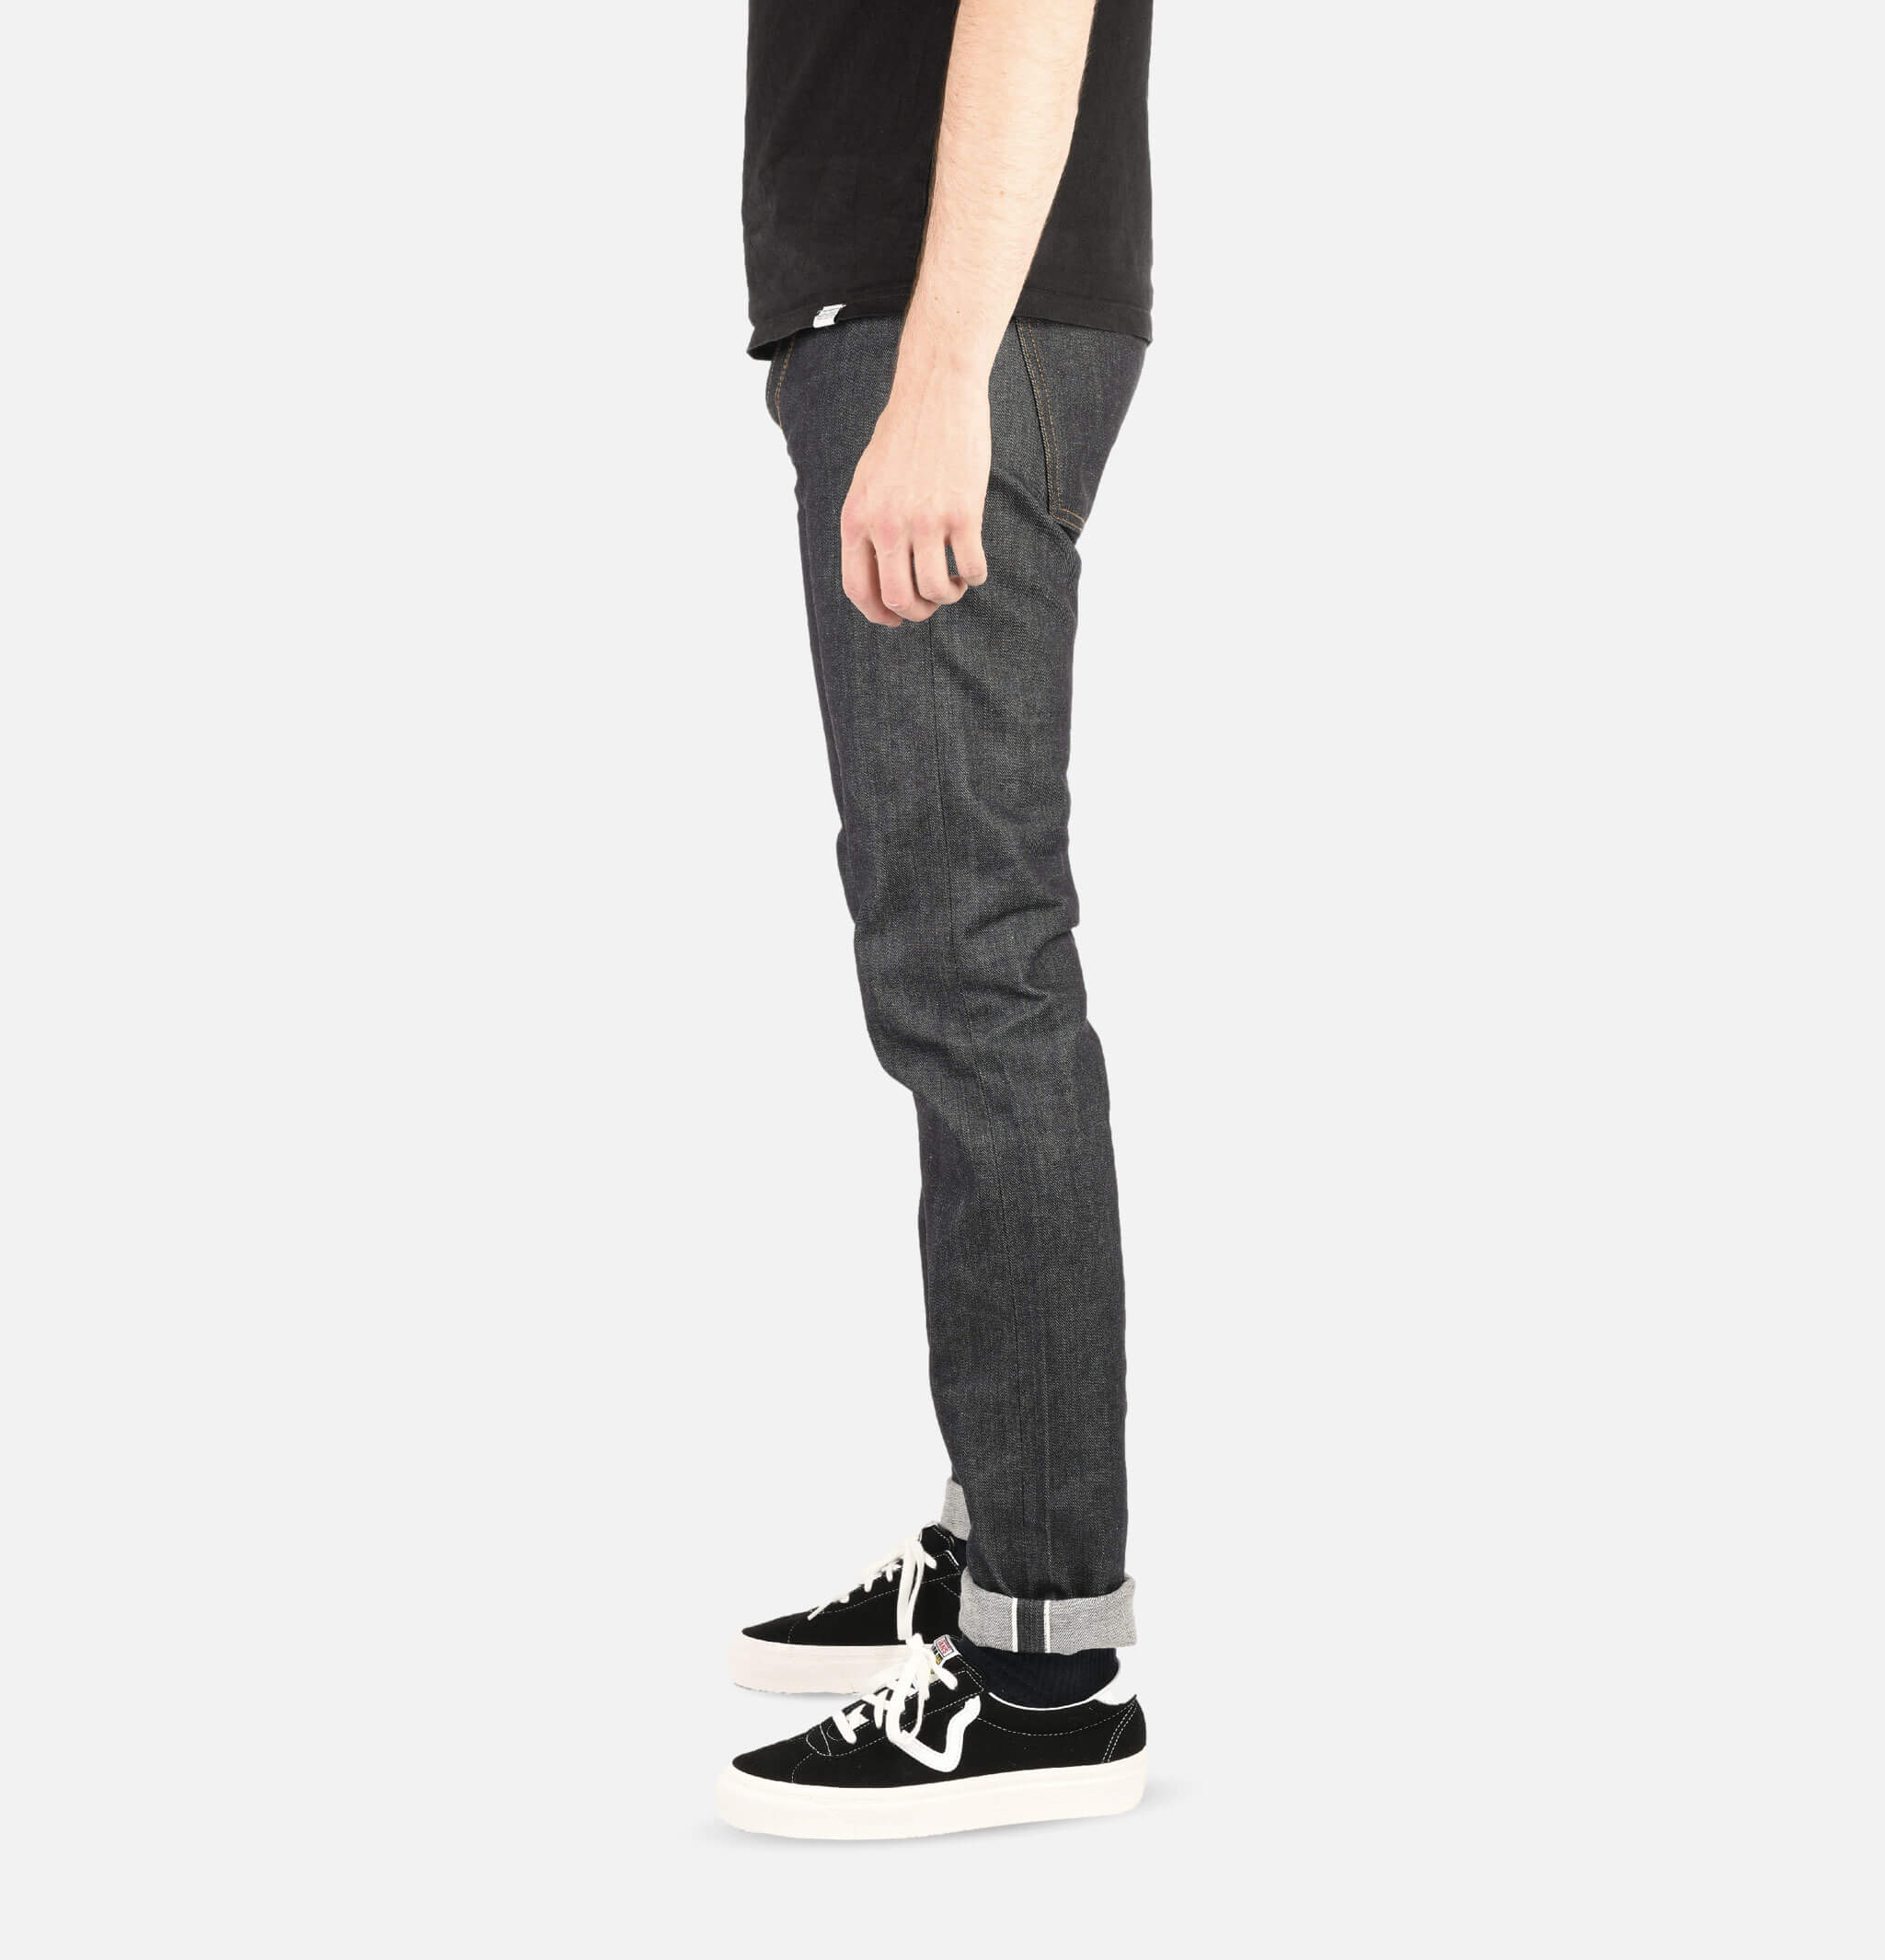 Super Guy Jeans Left Hand Twill